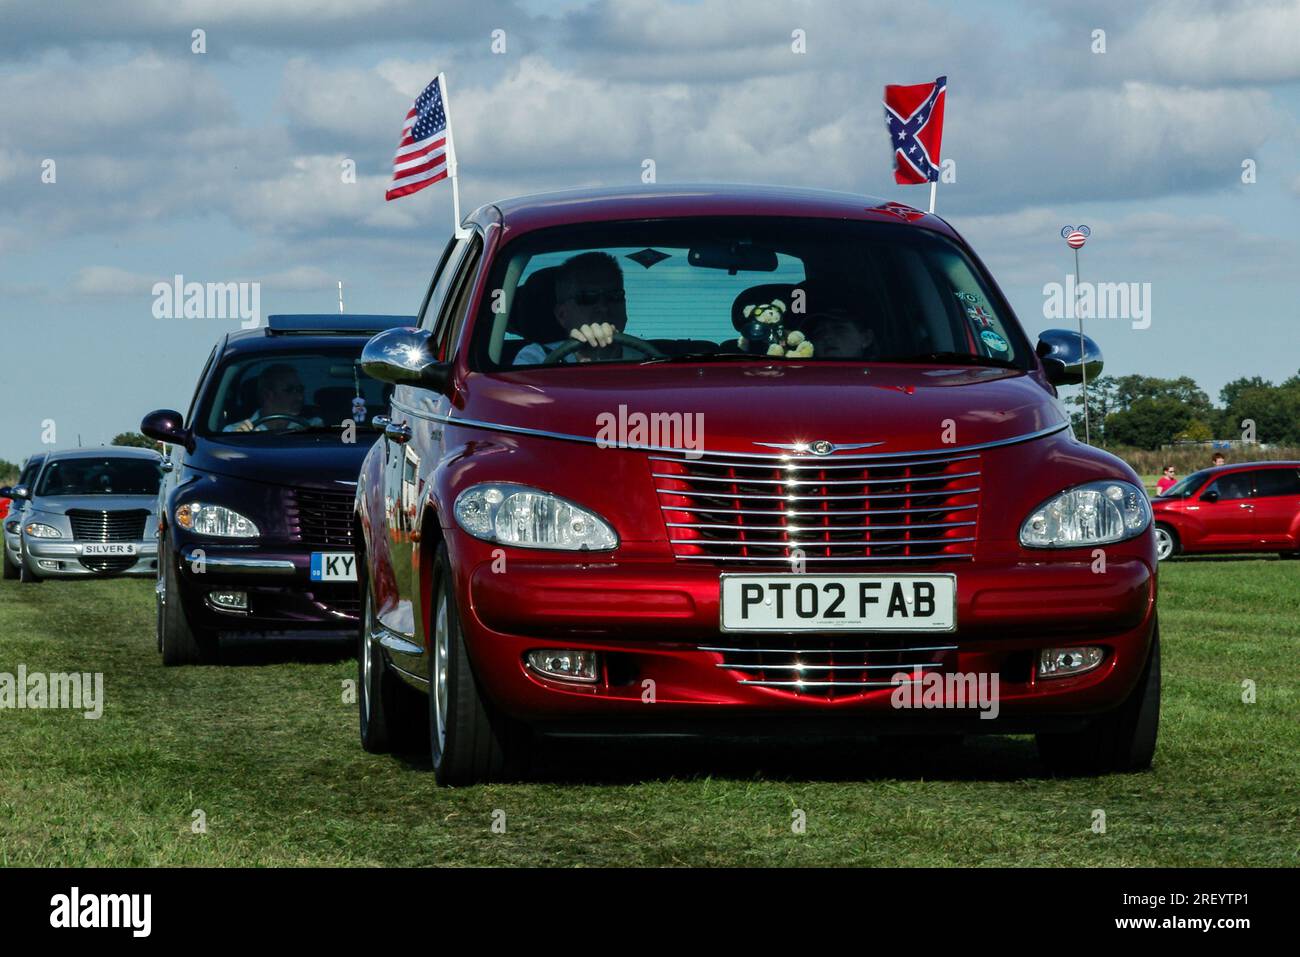 Chrysler PT Cruiser cavalcade at a wings and wheels event at Turweston Aerodrome in Buckinghamshire, UK. PT Cruiser automobile car enthusiasts Stock Photo